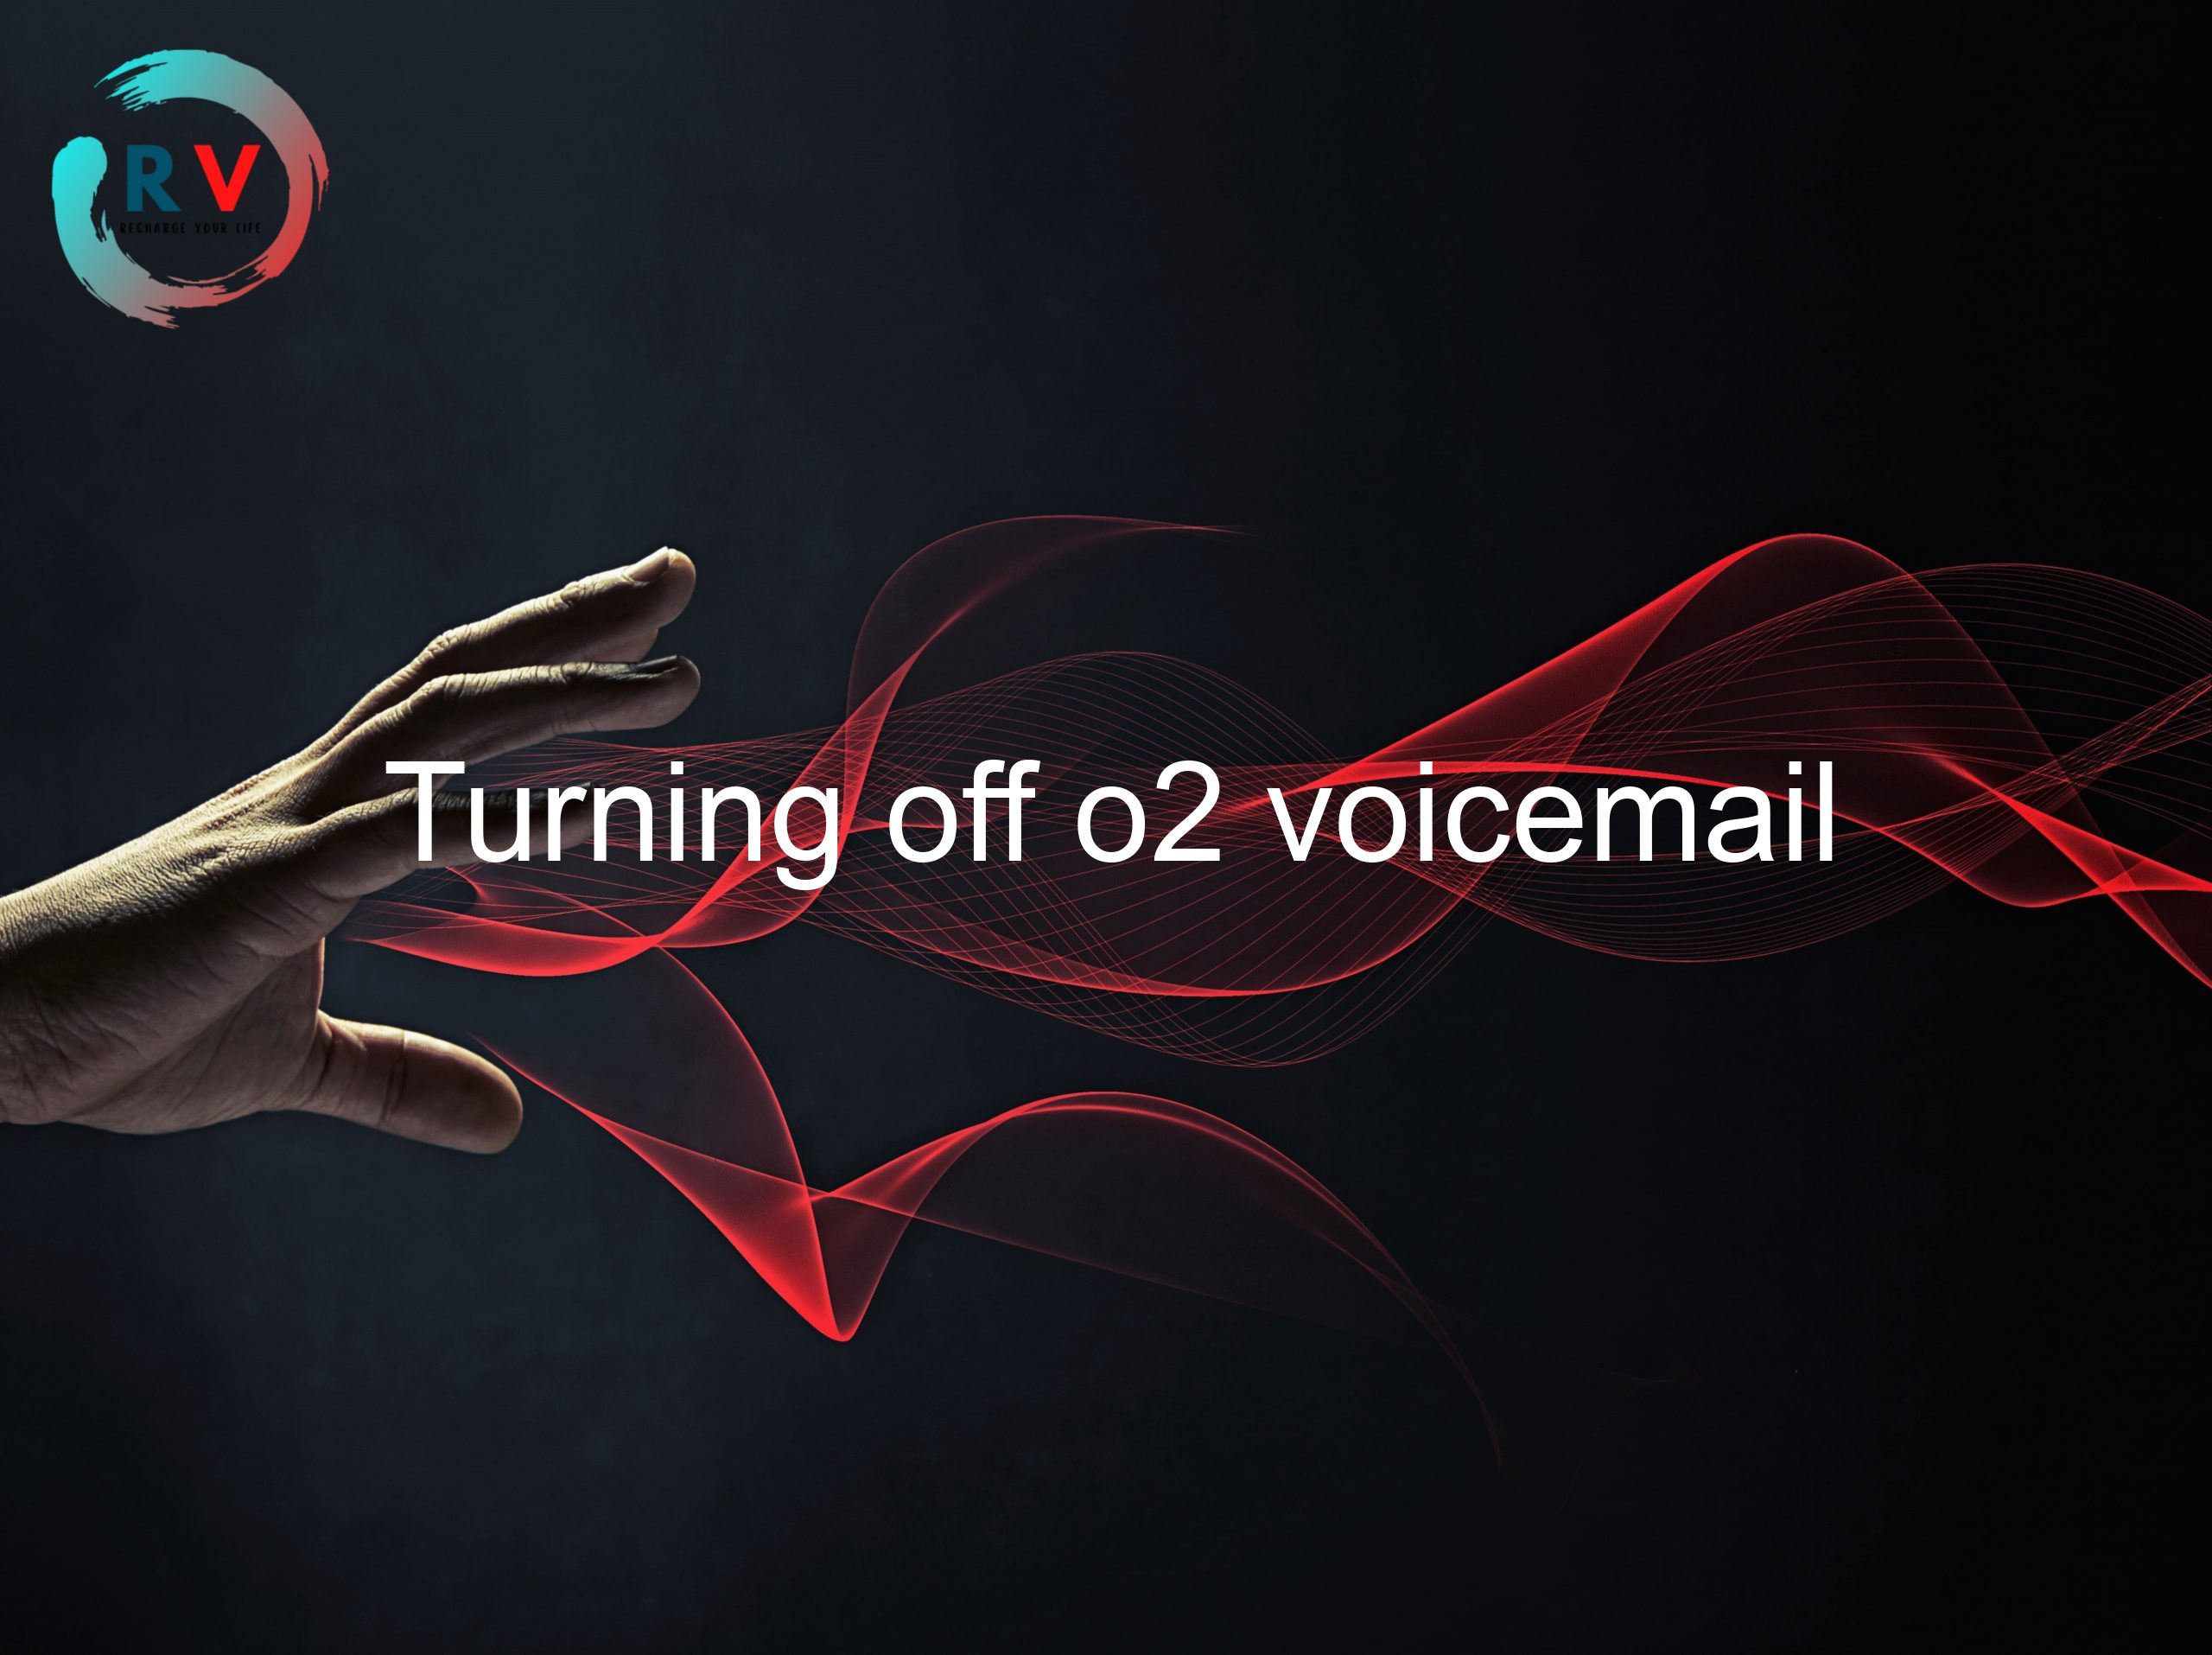 Turning off o2 voicemail